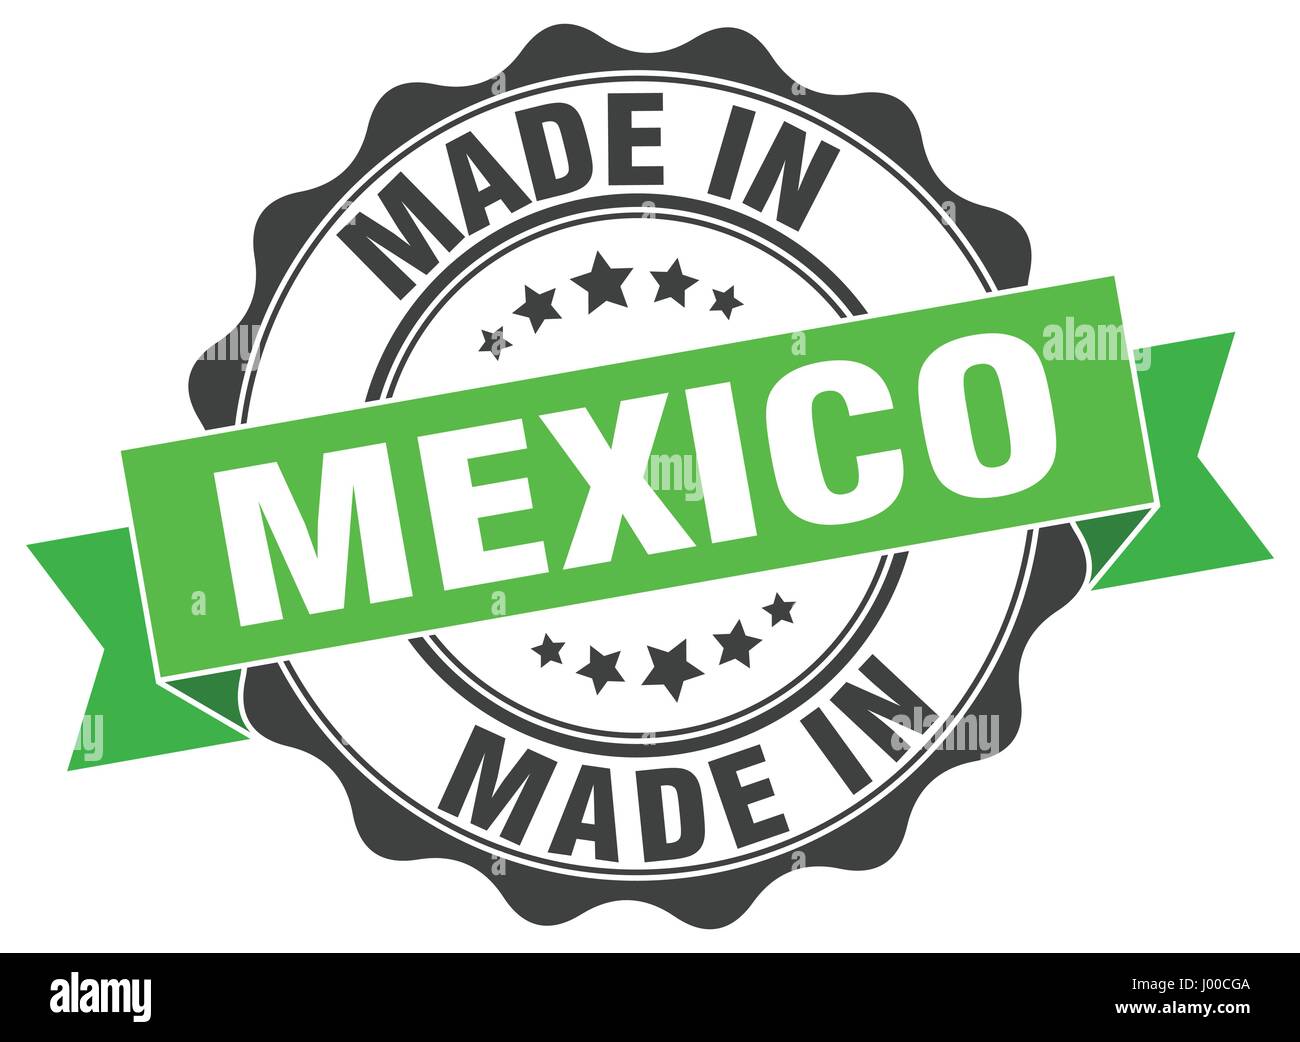 Made in mexico label Stock Vector Images - Page 2 - Alamy